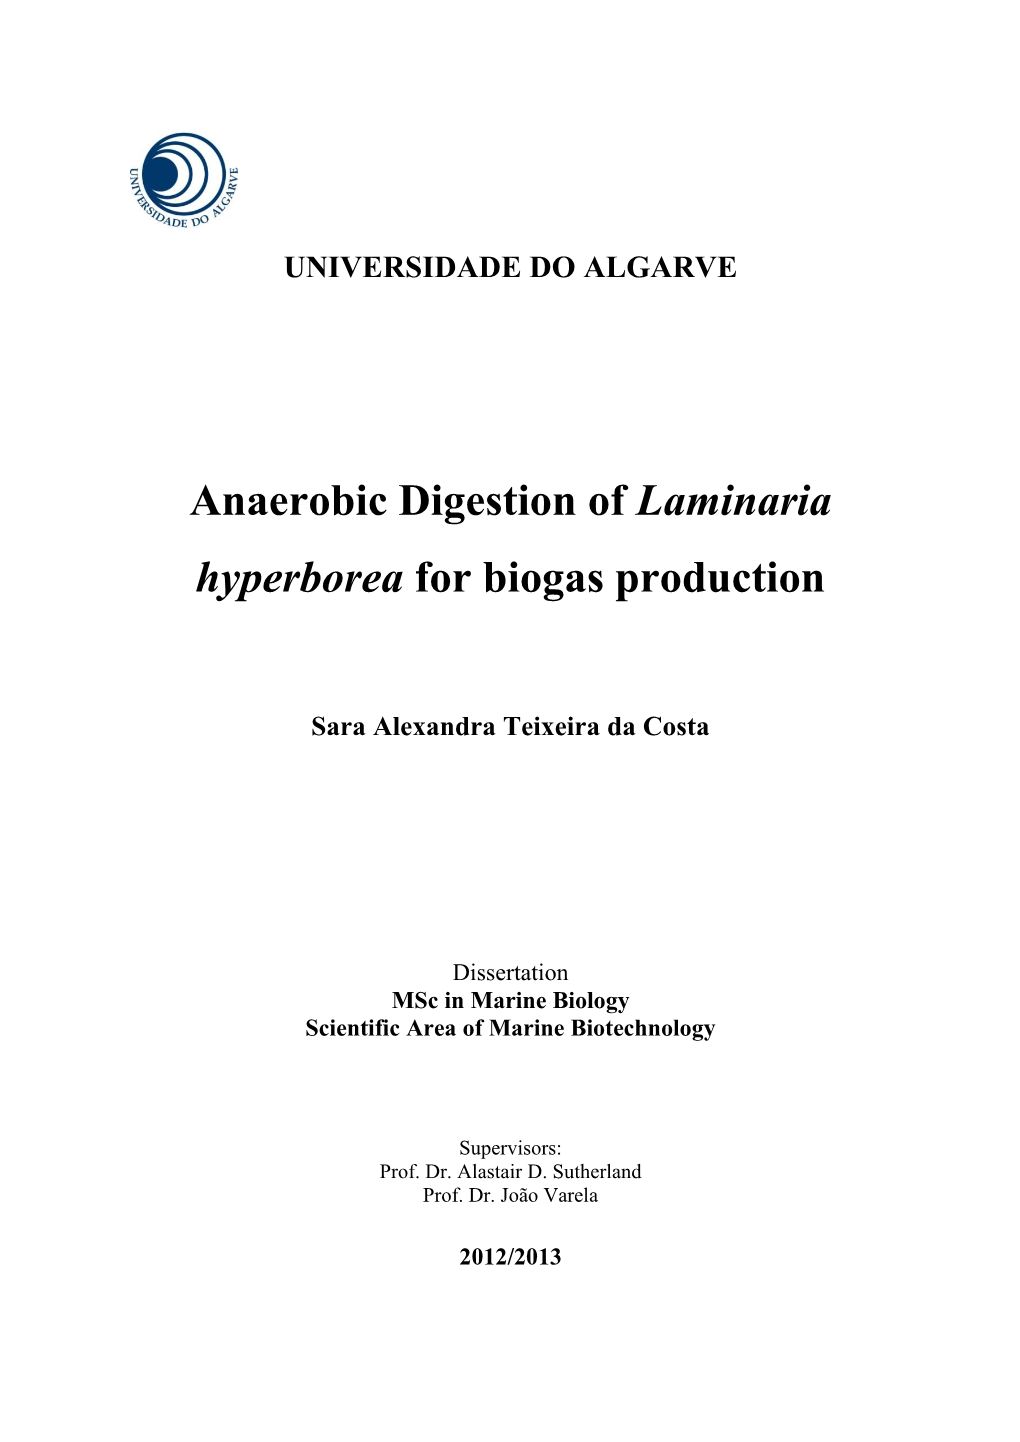 Anaerobic Digestion of Laminaria Hyperborea for Biogas Production